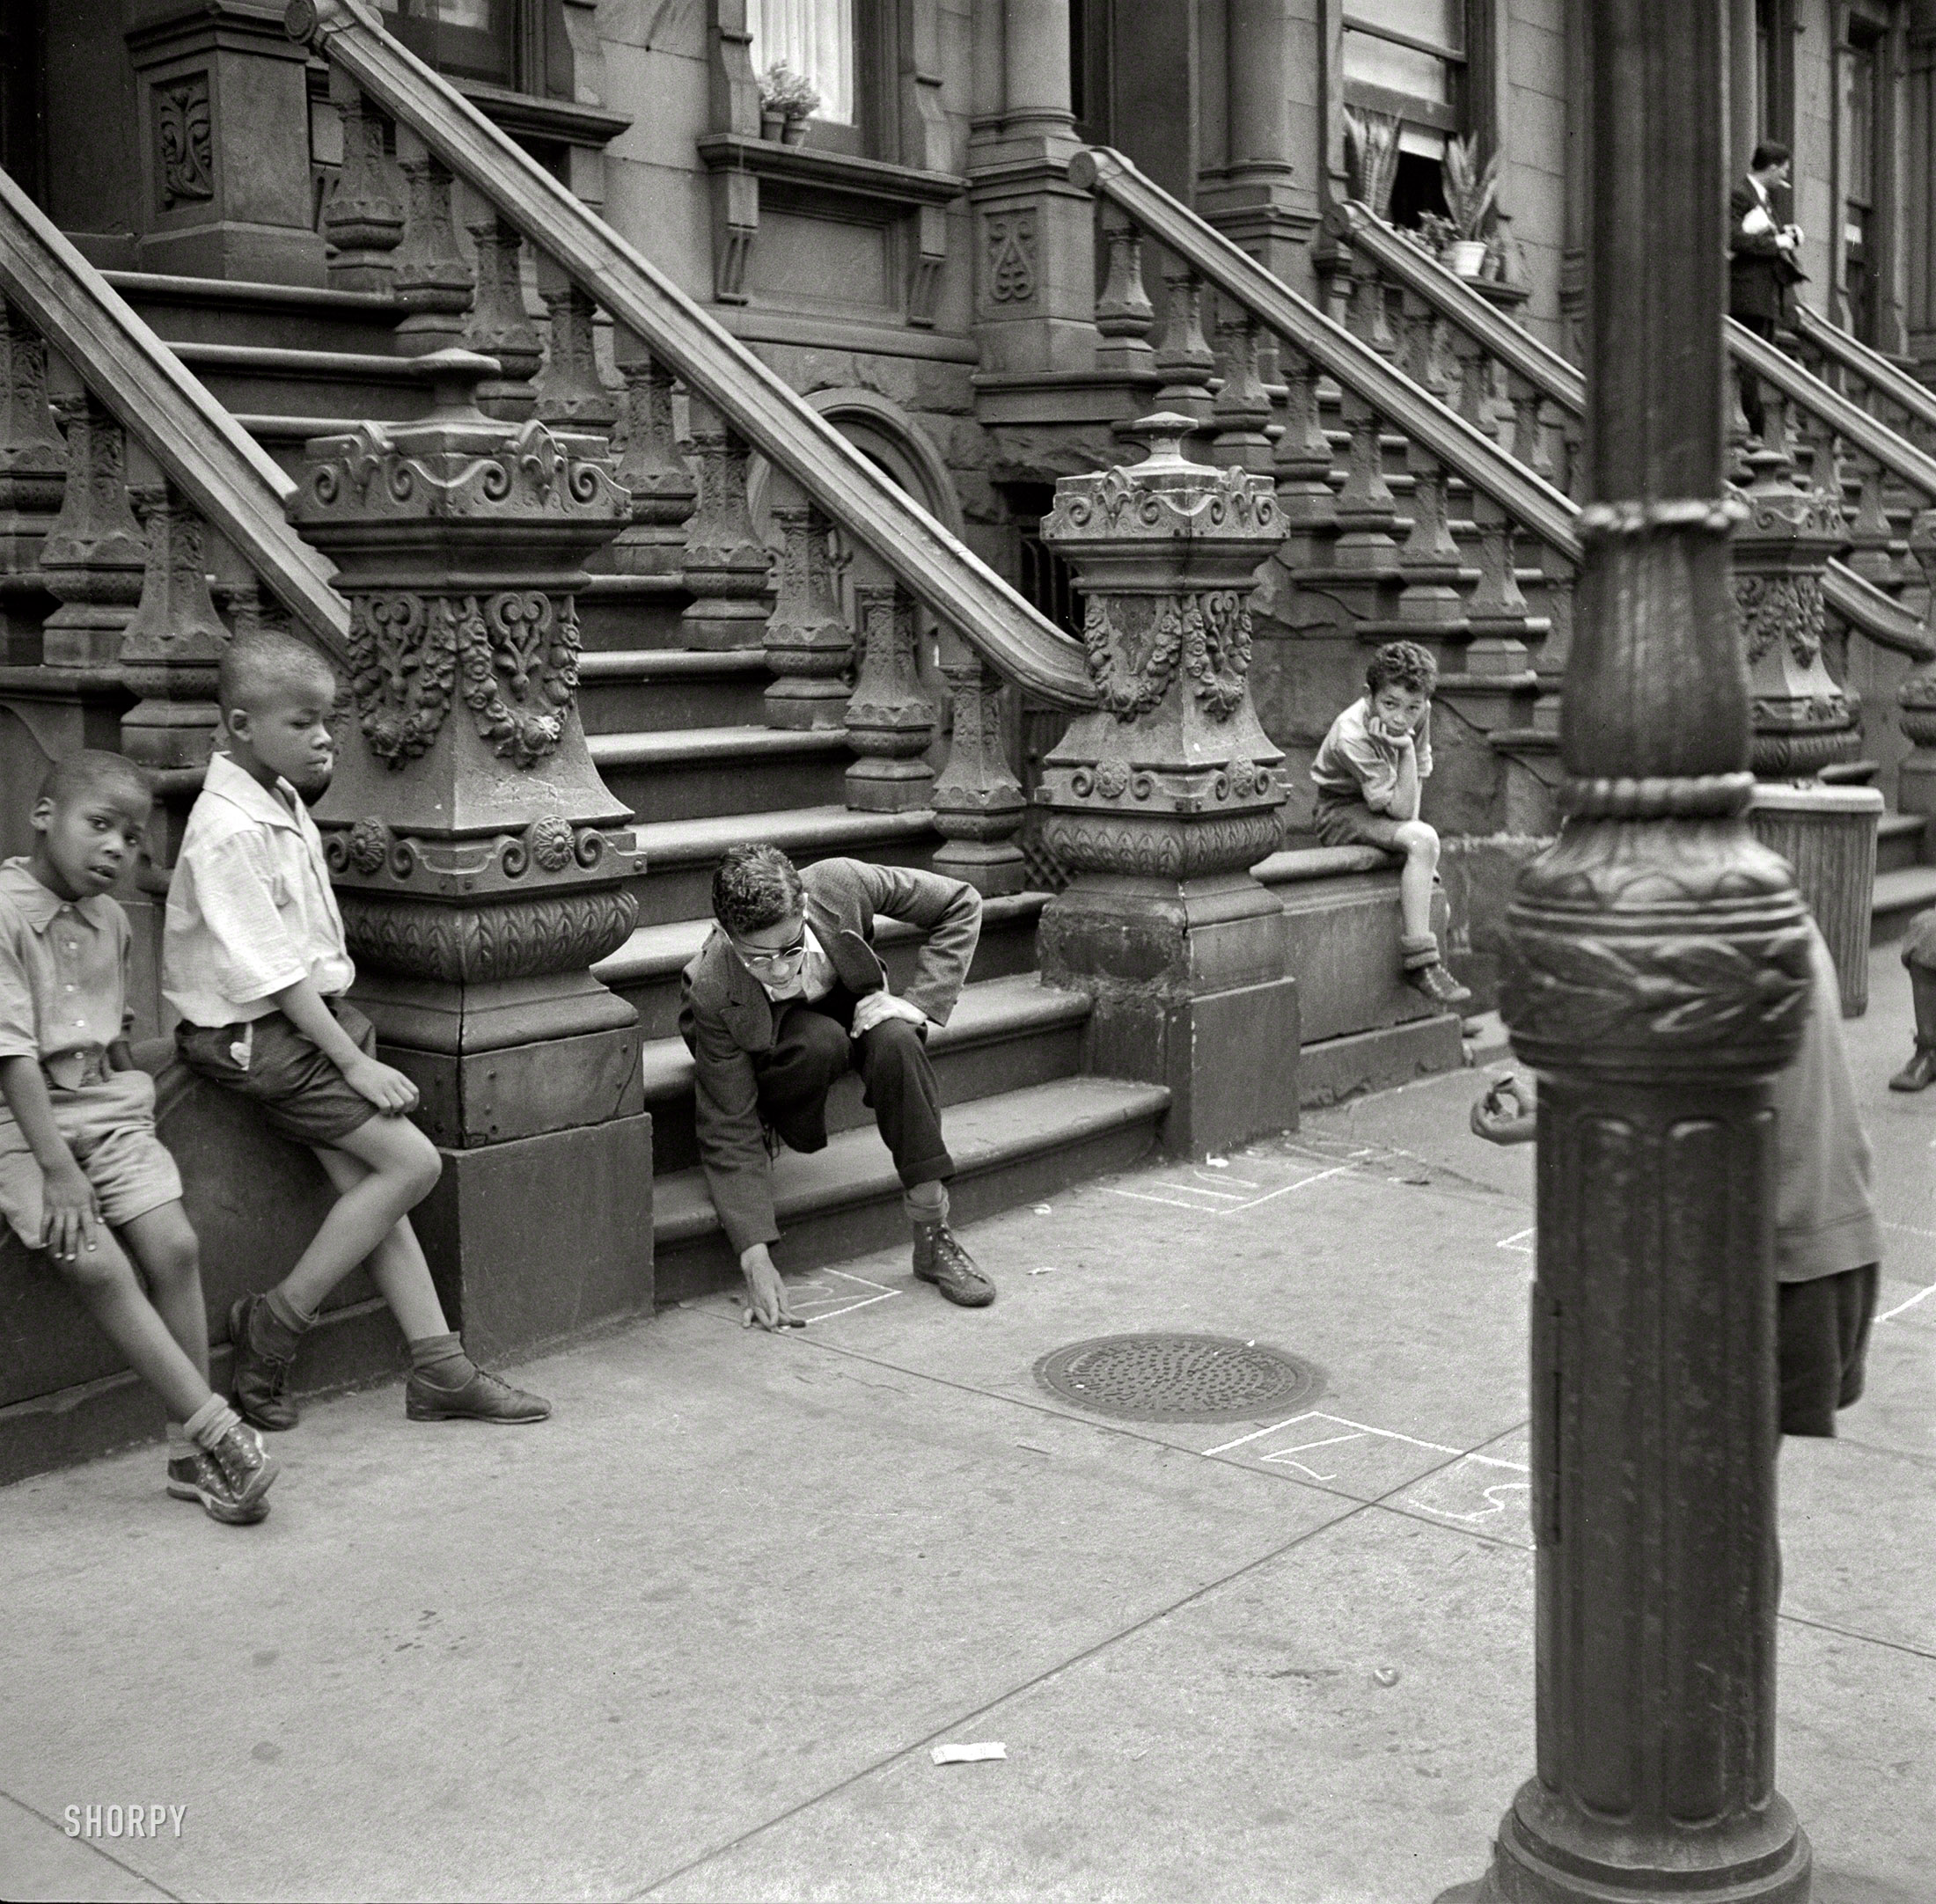 Summer 1938. "New York street scene -- boys playing." Photo by Jack Allison for the Resettlement Administration. View full size.